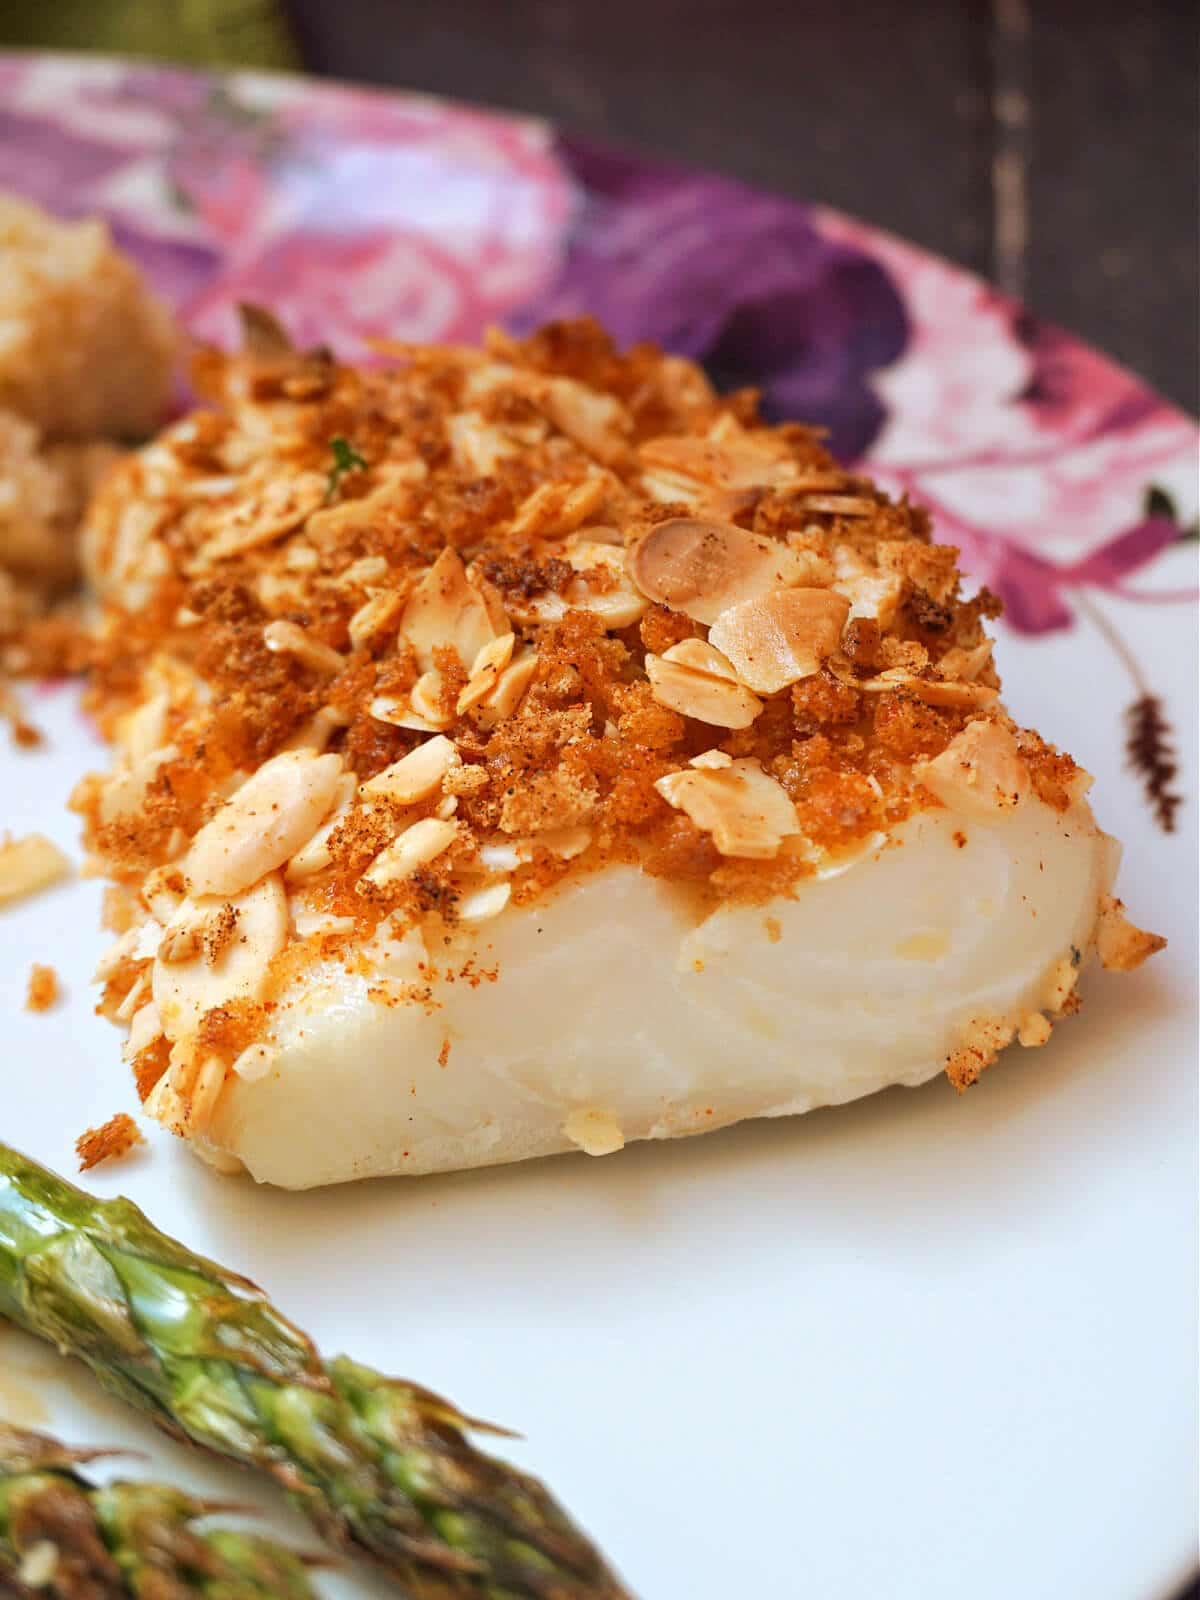 A crusted cod fillet on a white plate.